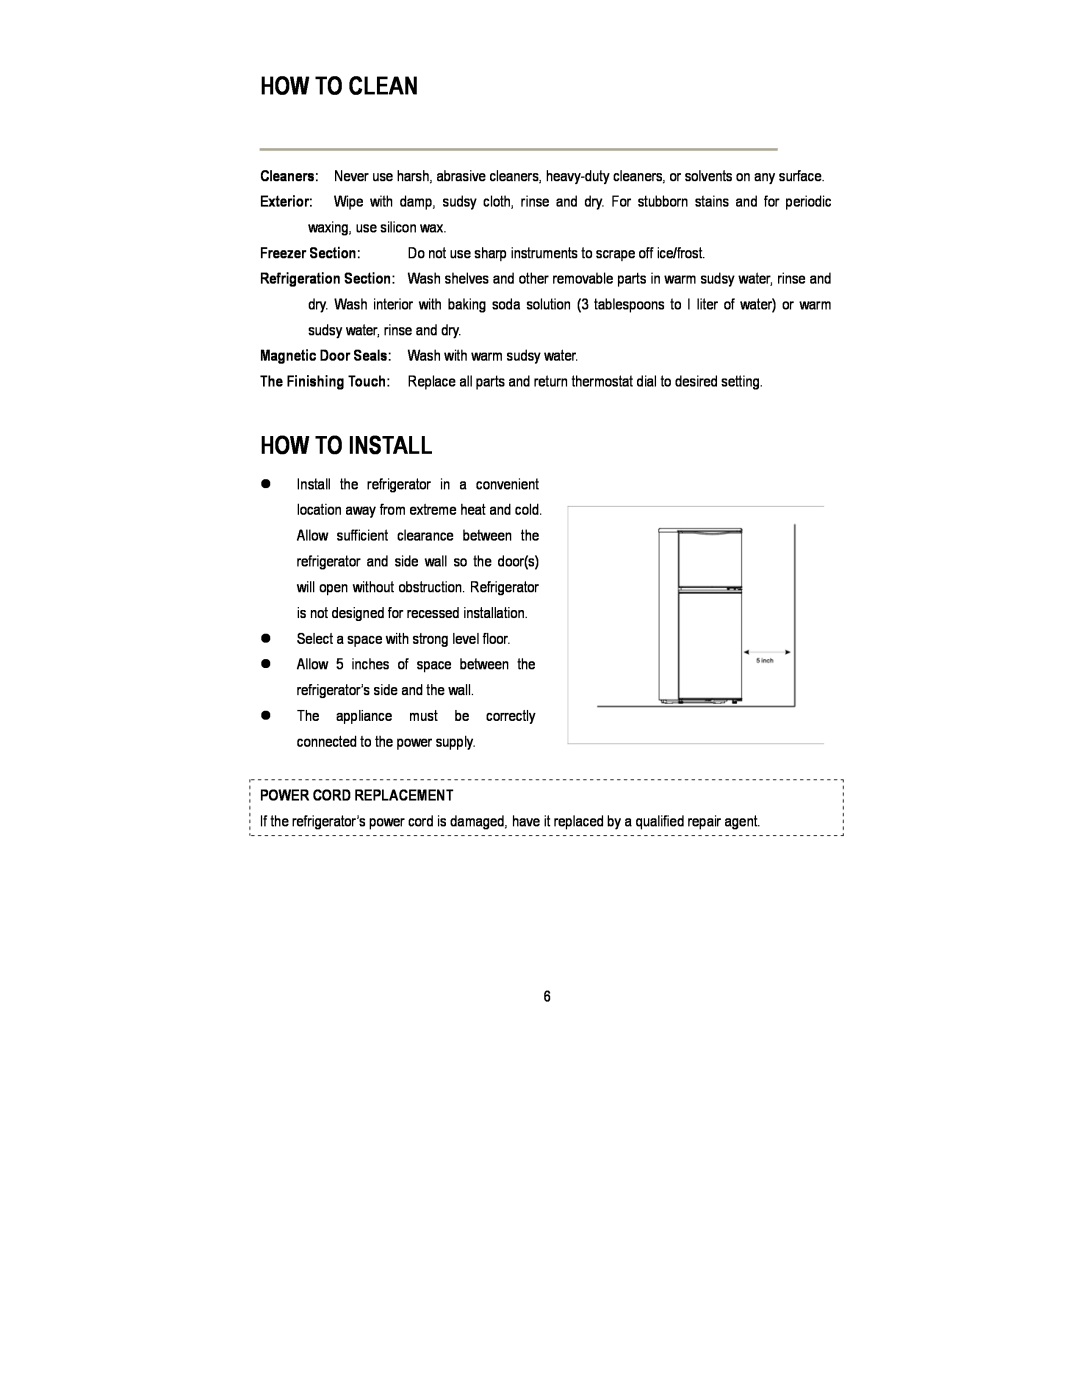 Magic Chef MCBR415S instruction manual How To Clean, How To Install, Power Cord Replacement 